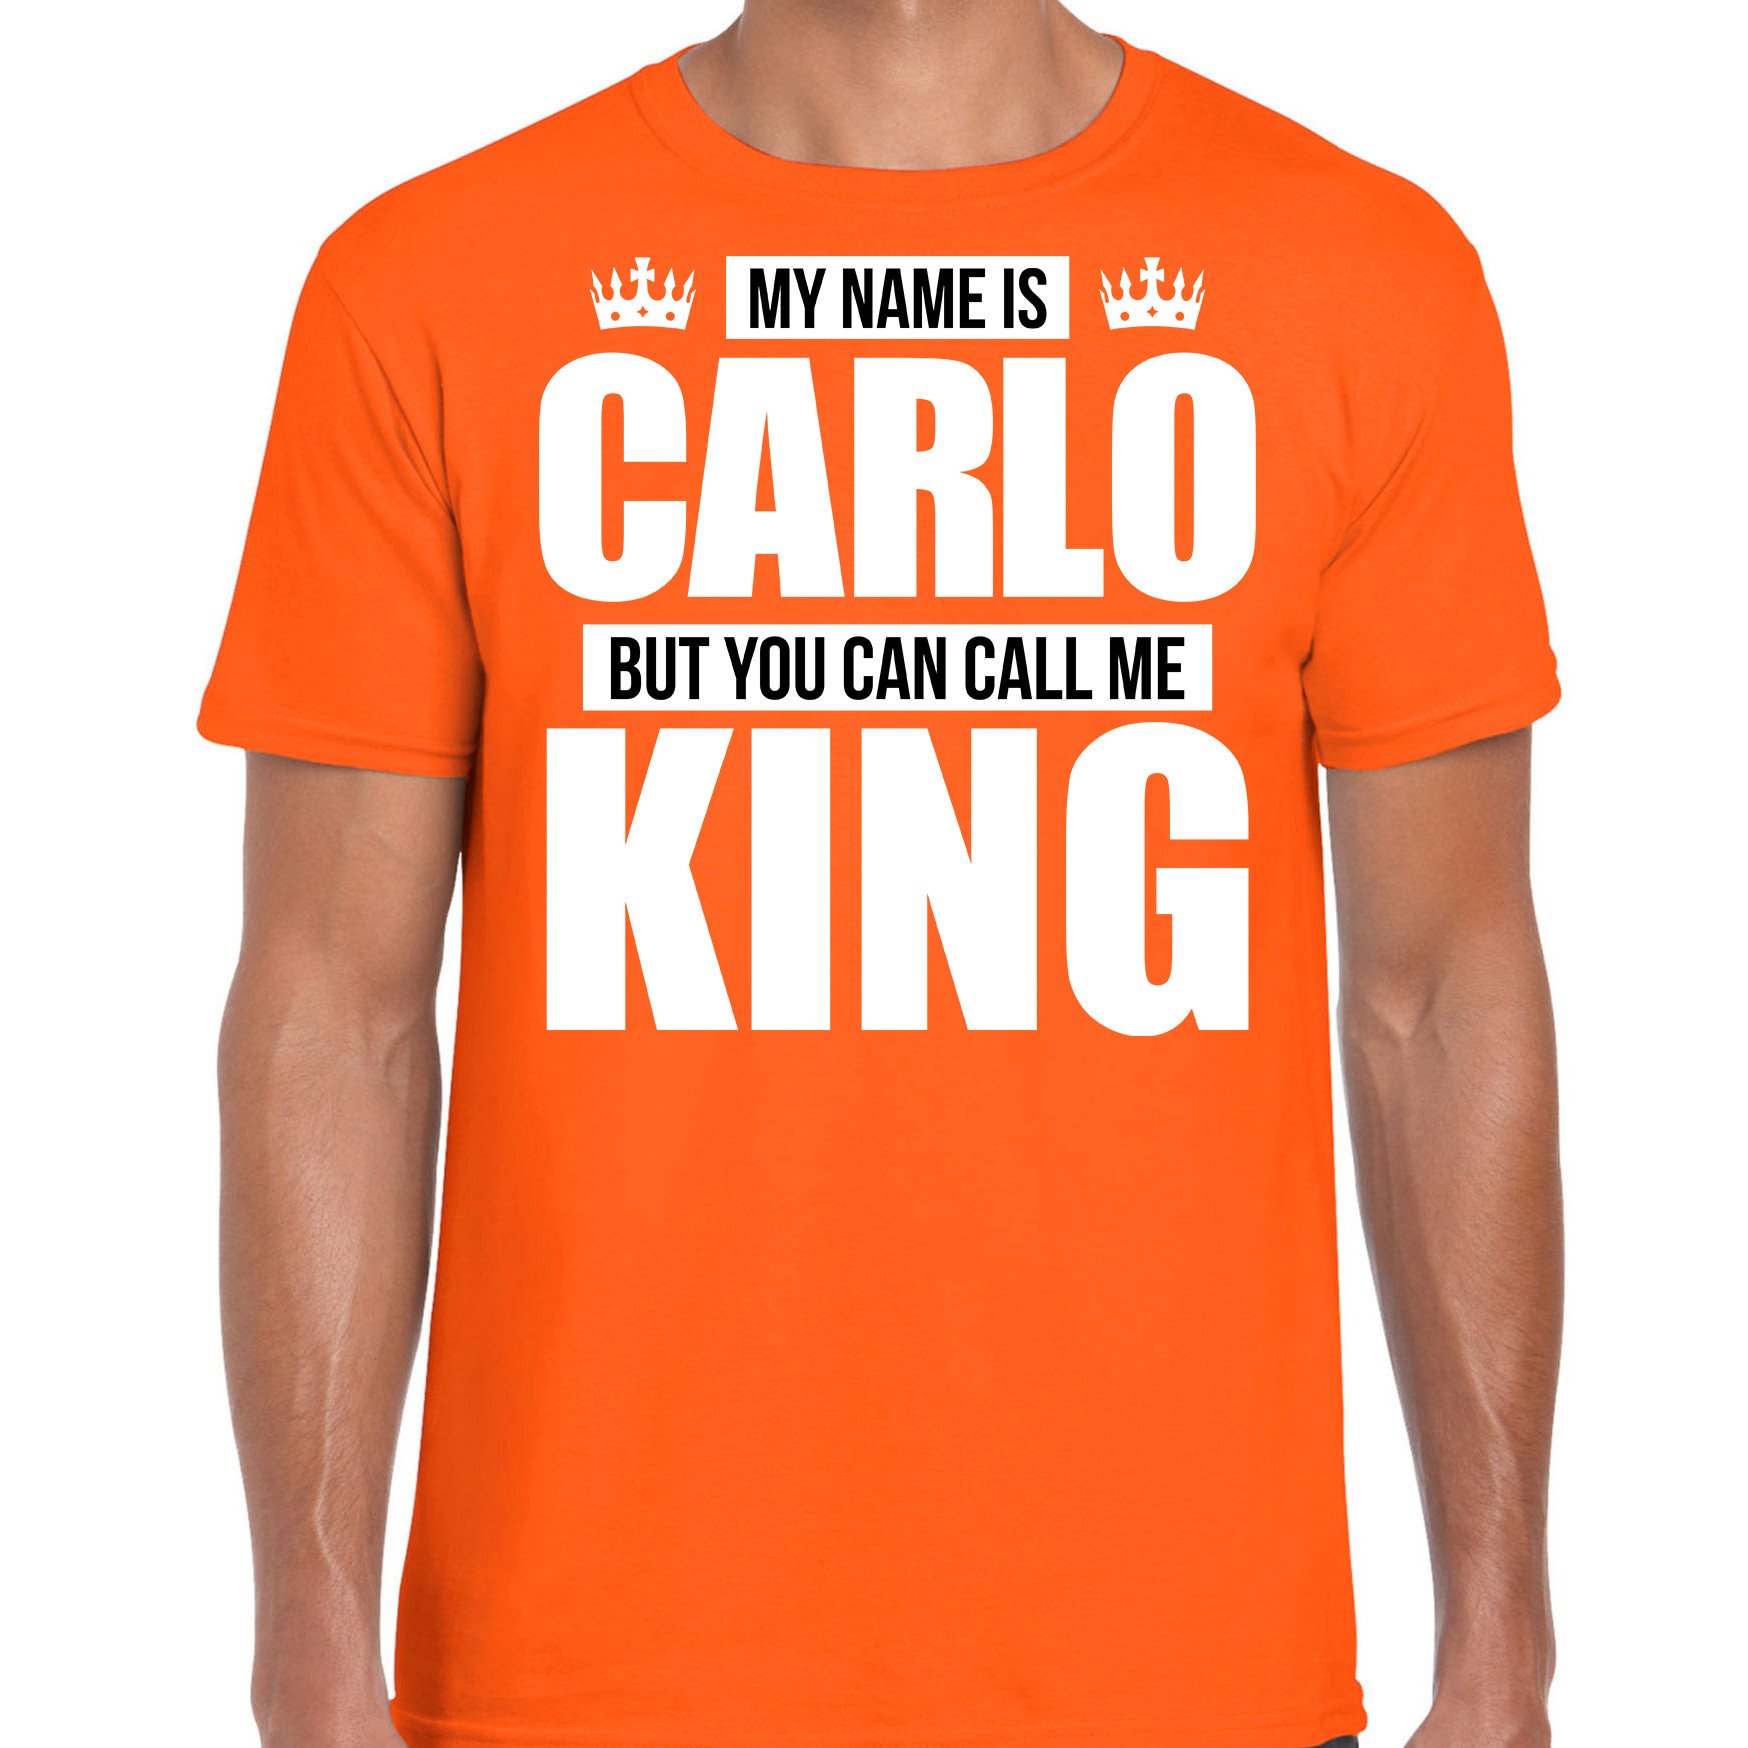 Naam cadeau t-shirt my name is Carlo but you can call me King oranje voor heren